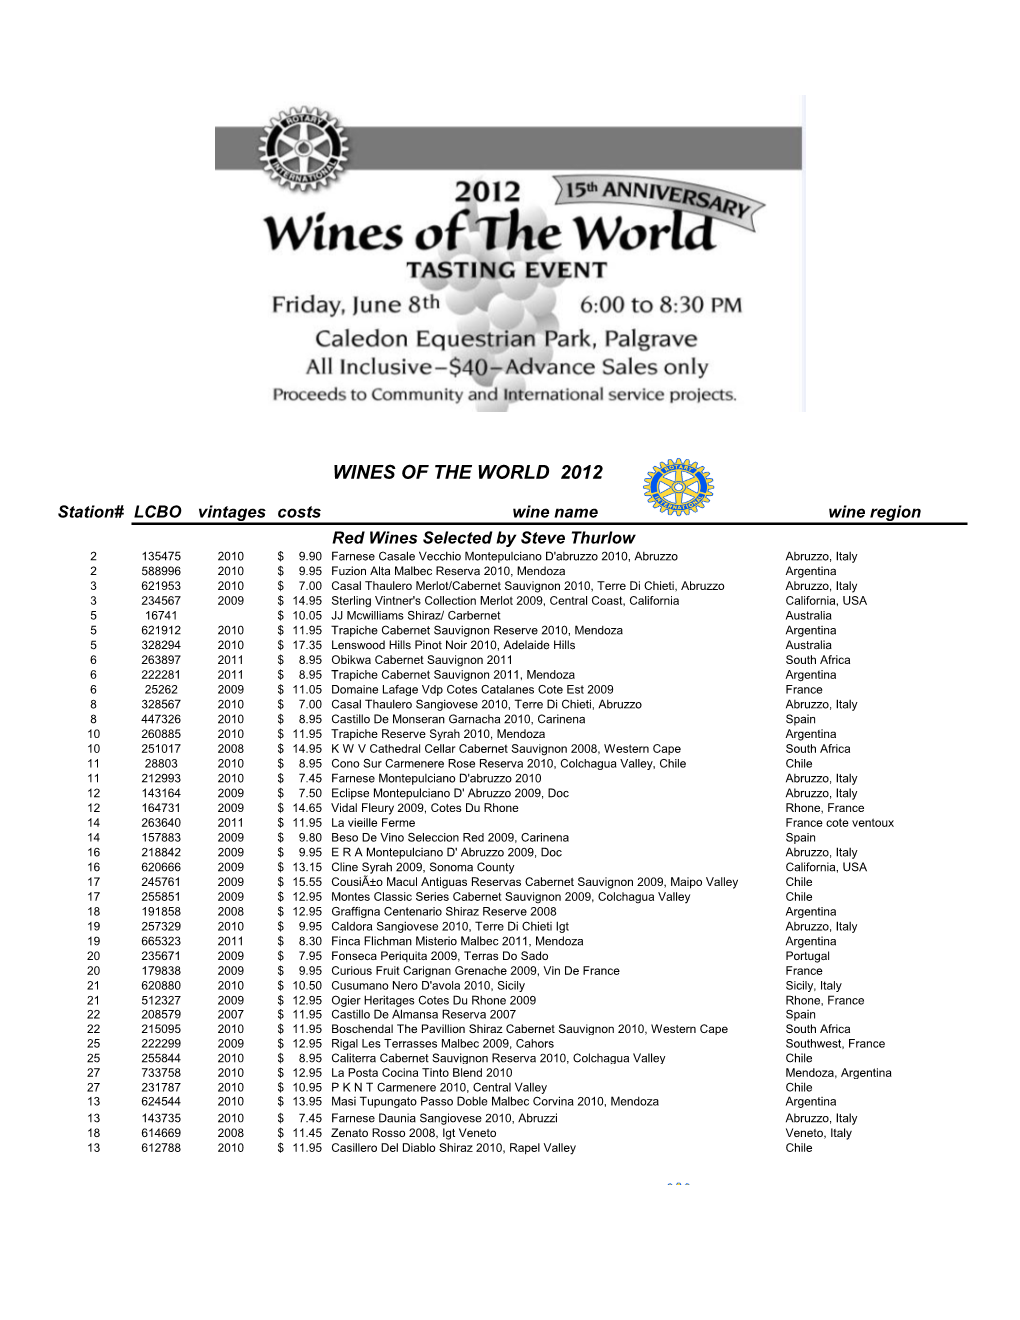 Wines of the World 2012